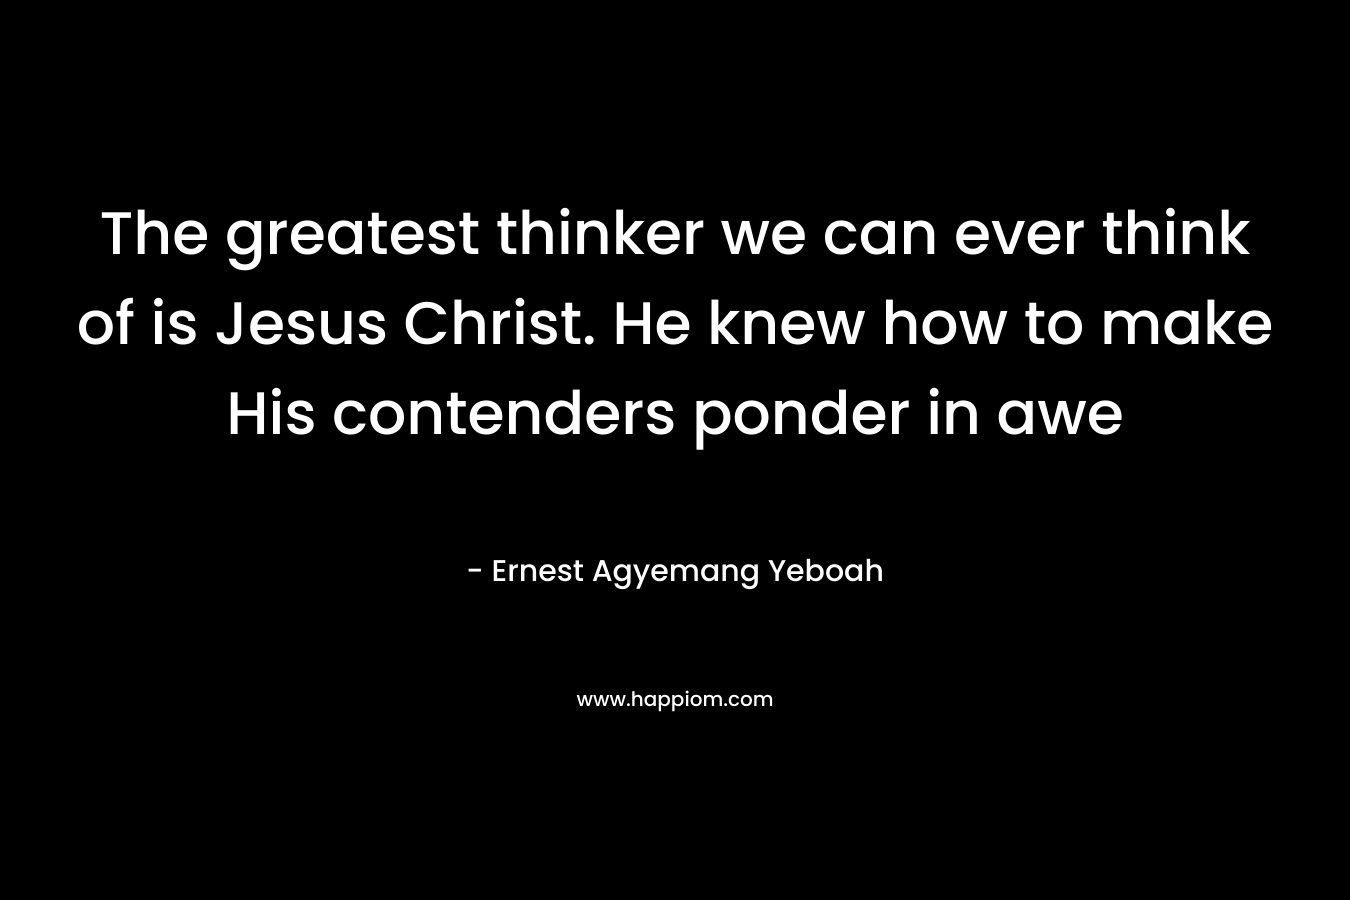 The greatest thinker we can ever think of is Jesus Christ. He knew how to make His contenders ponder in awe